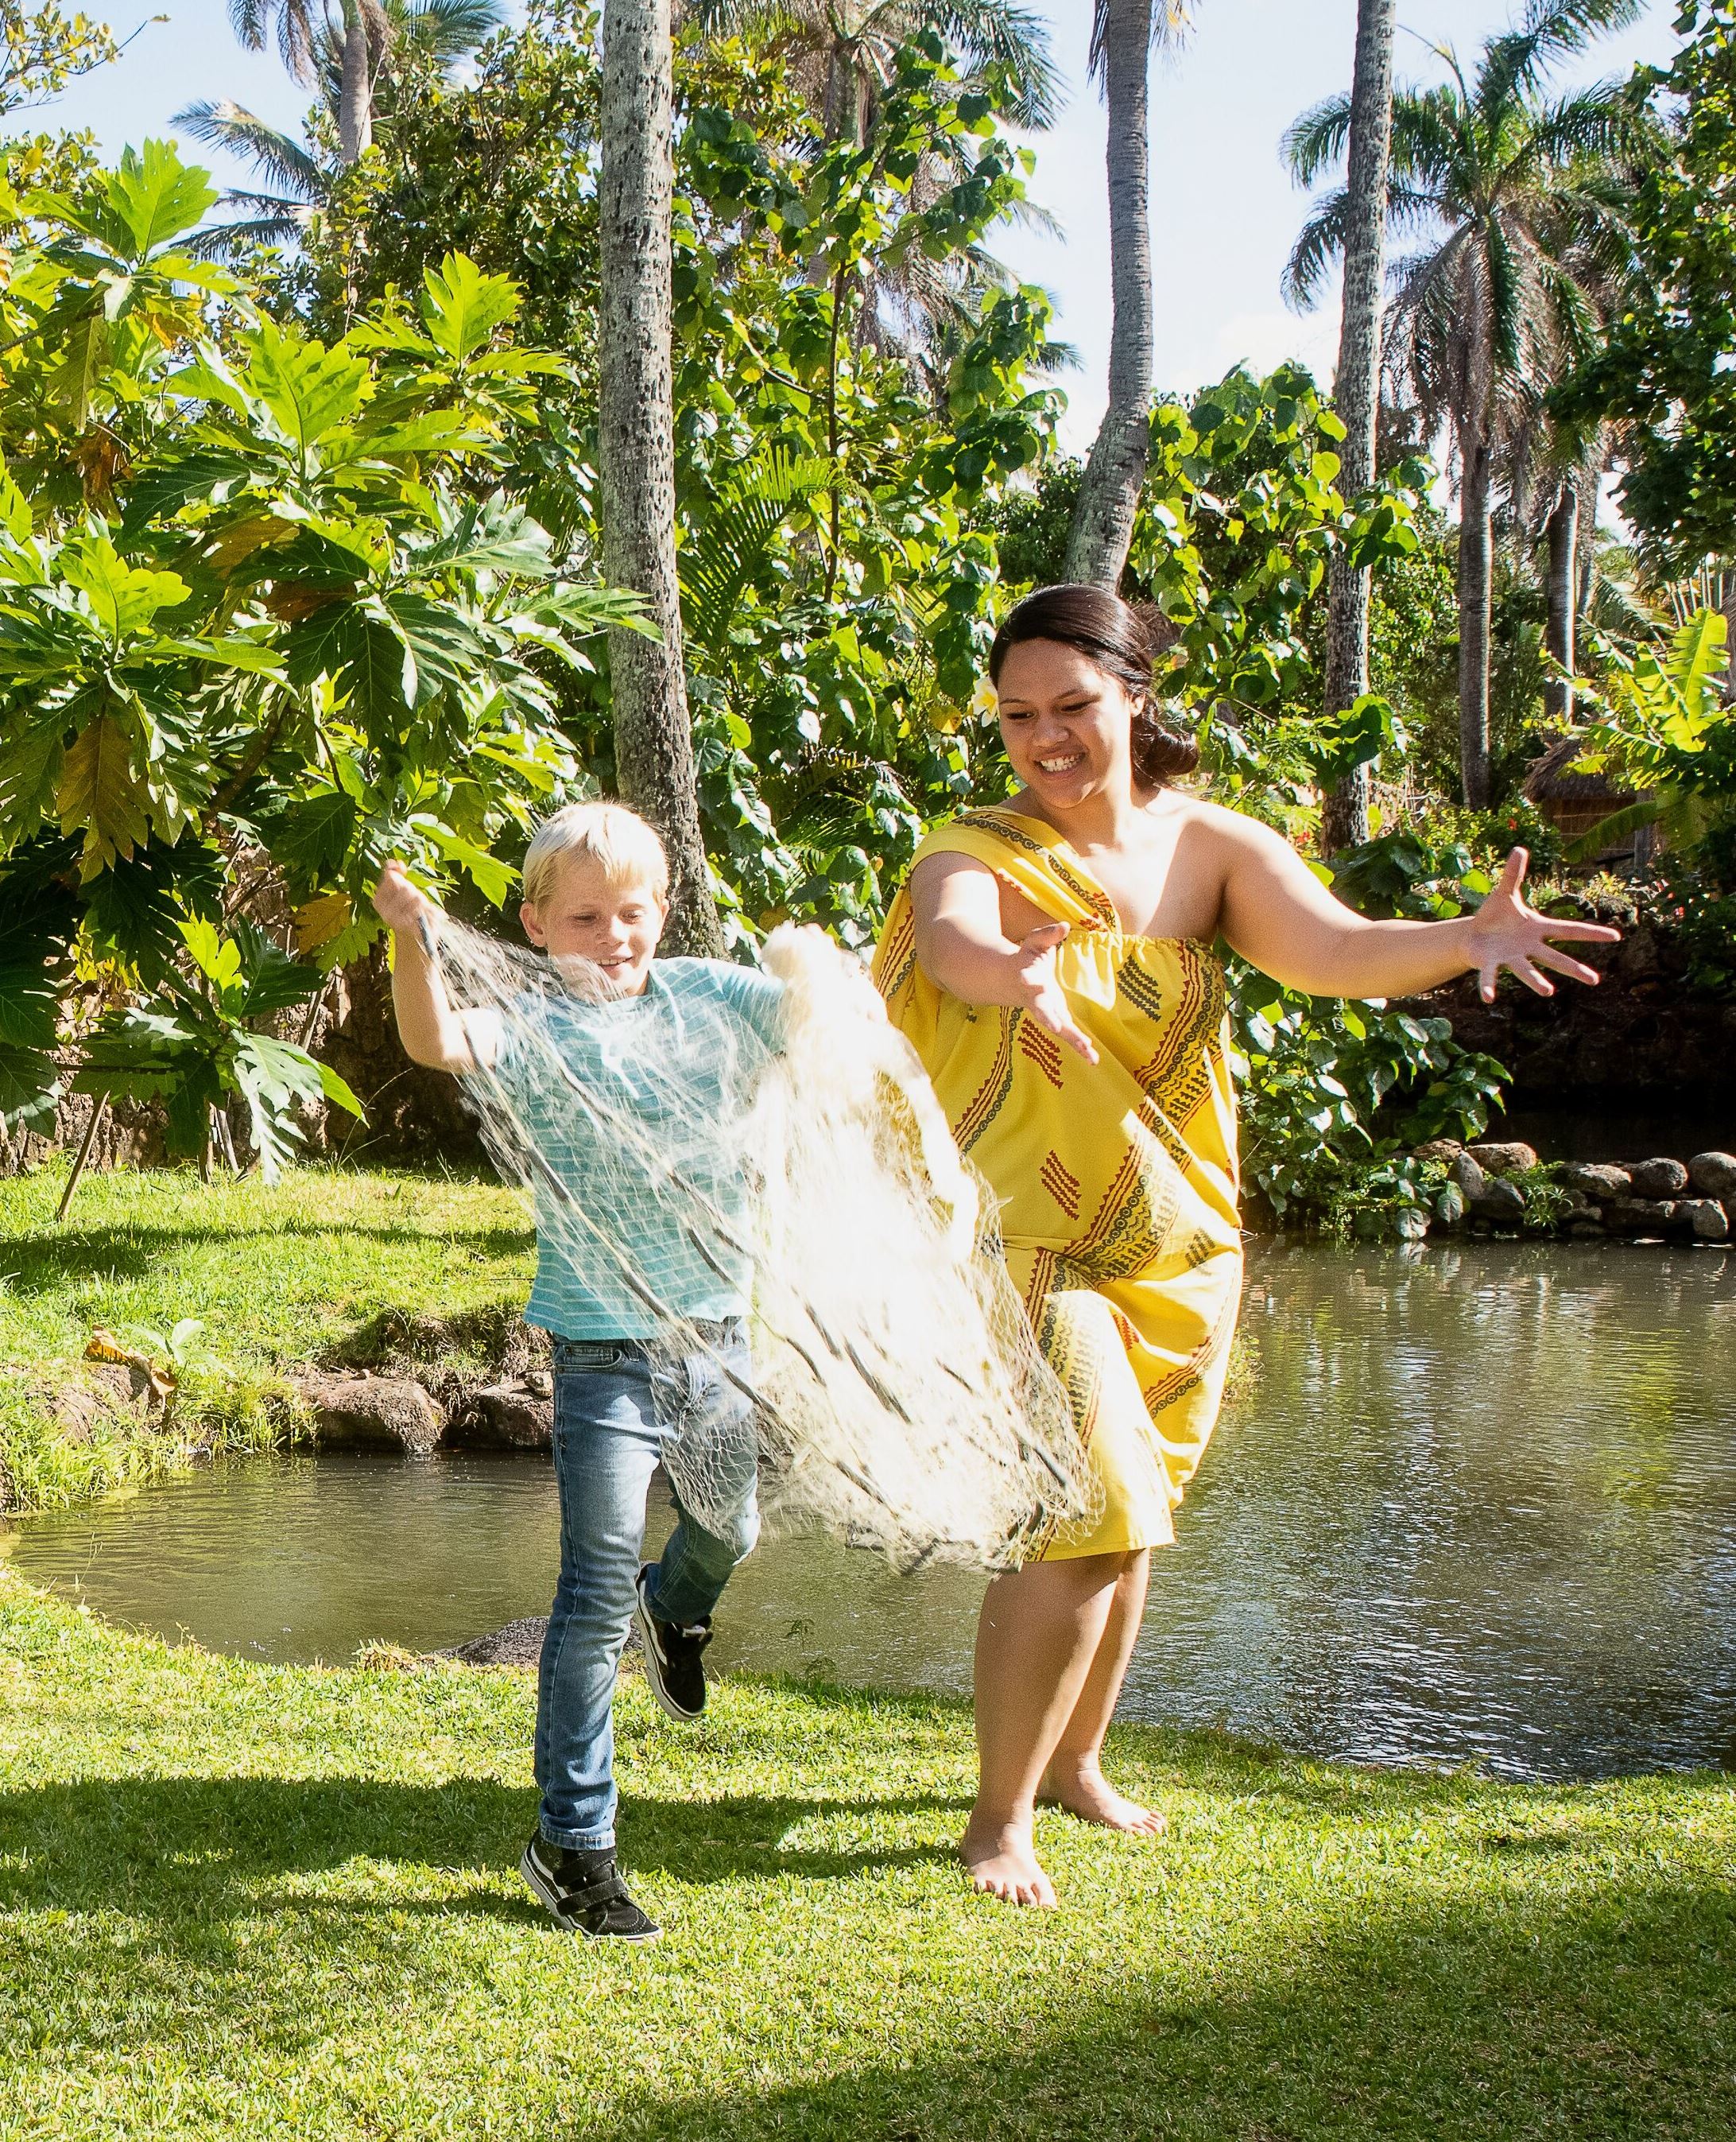 Picture of boy tossing a fishing net in the Hawaiian Village at the Polynesian Cultural Center